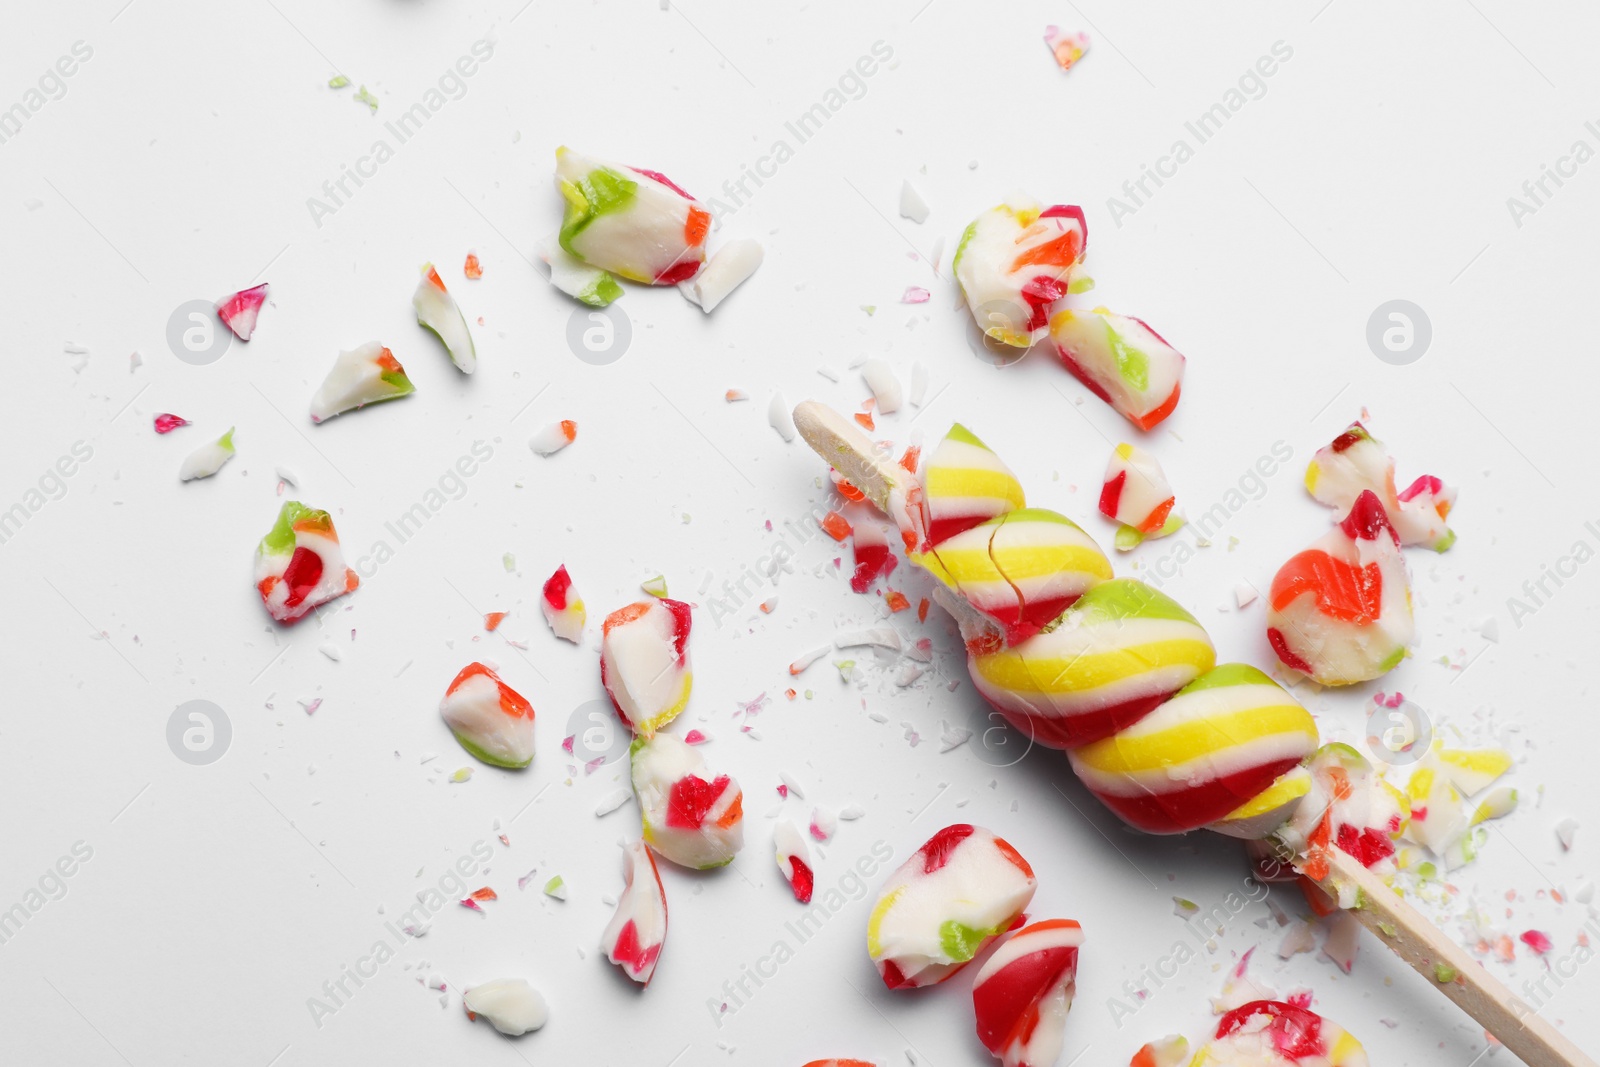 Photo of Smashed sweet lollipop on light background, top view